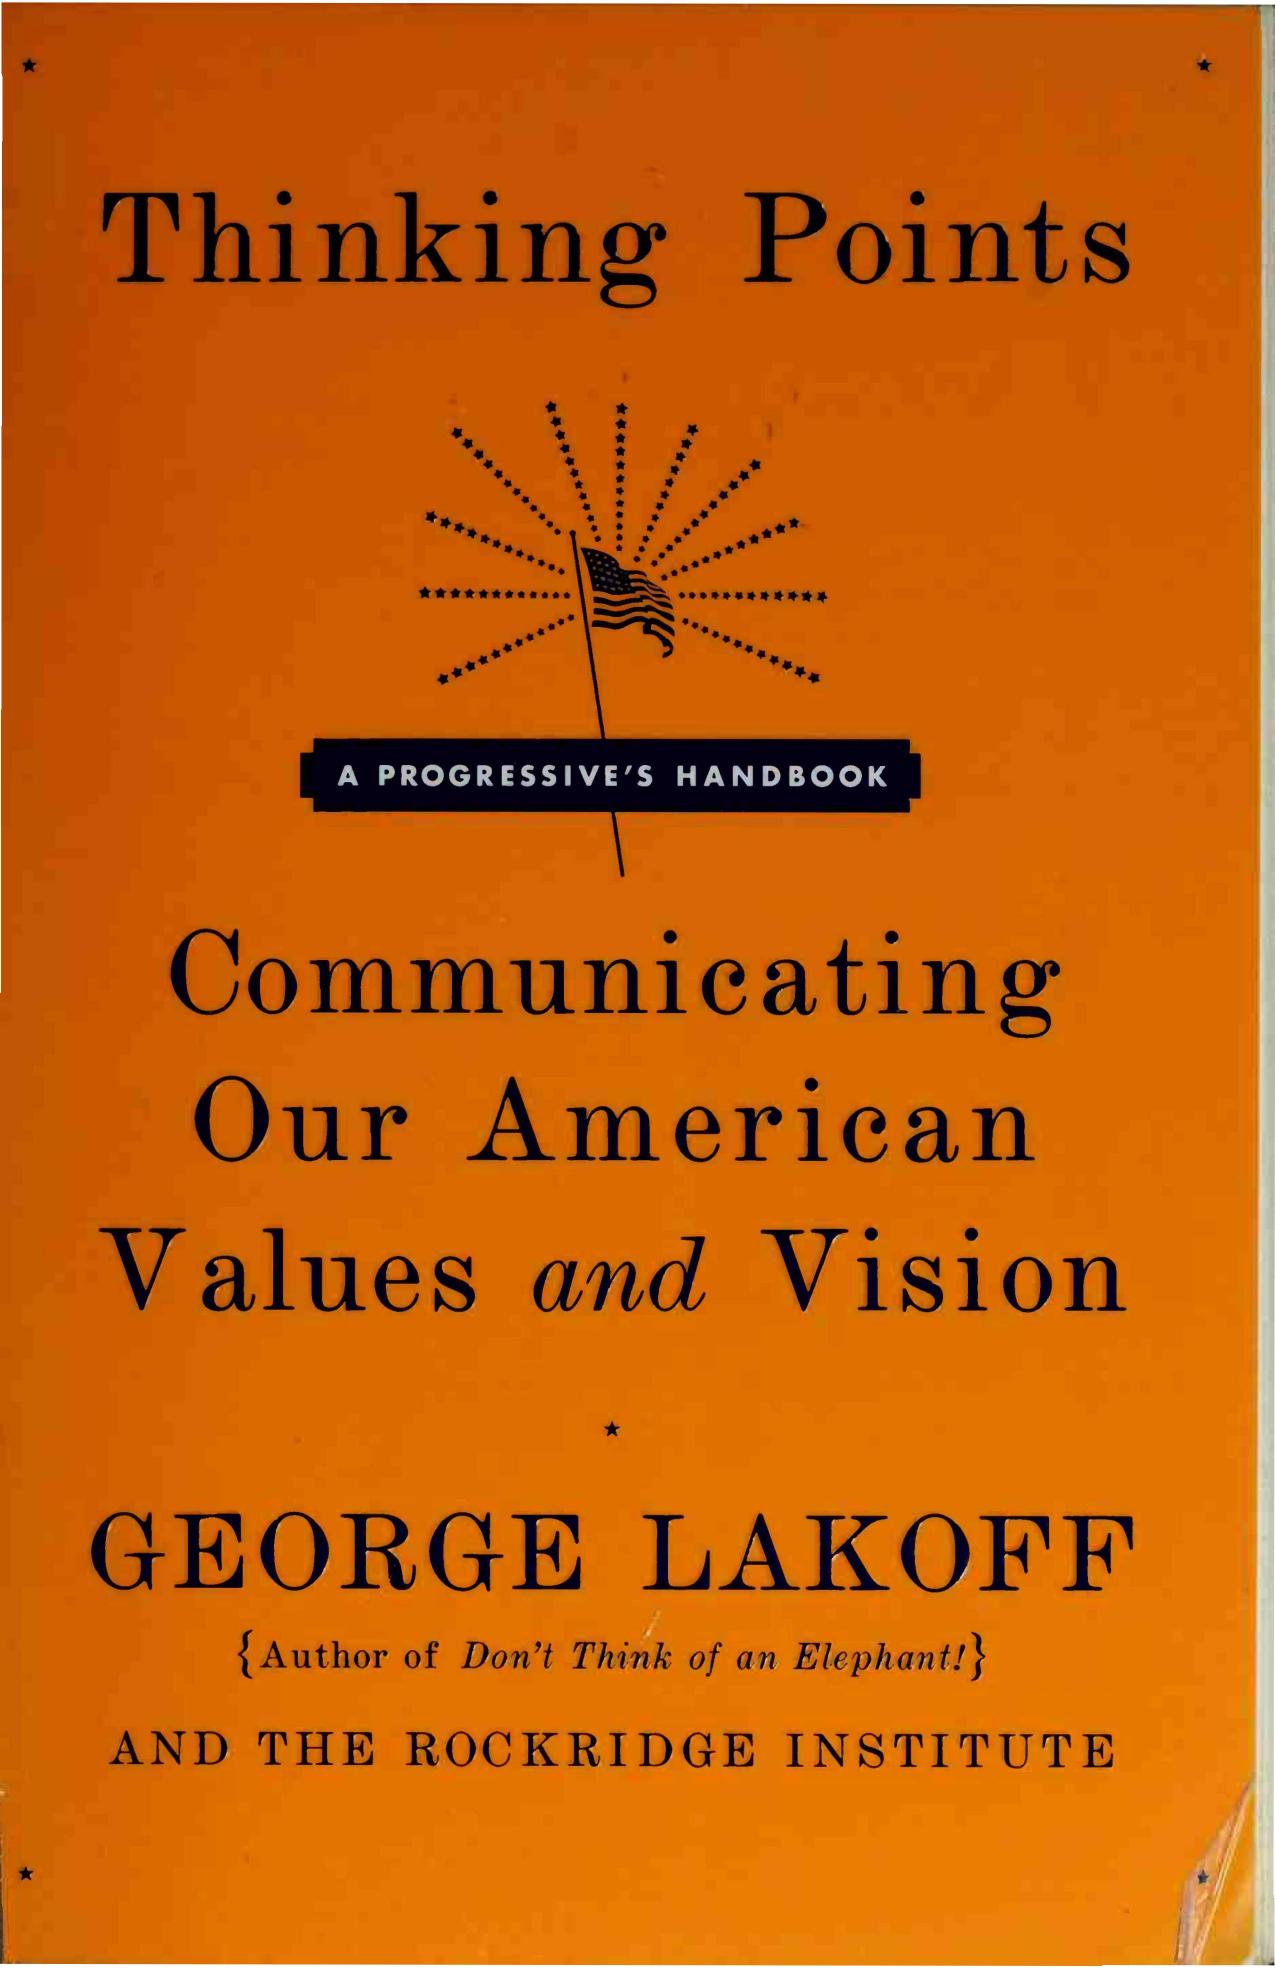 Thinking Points: Communicating Our American Values and Vision by George Lakoff